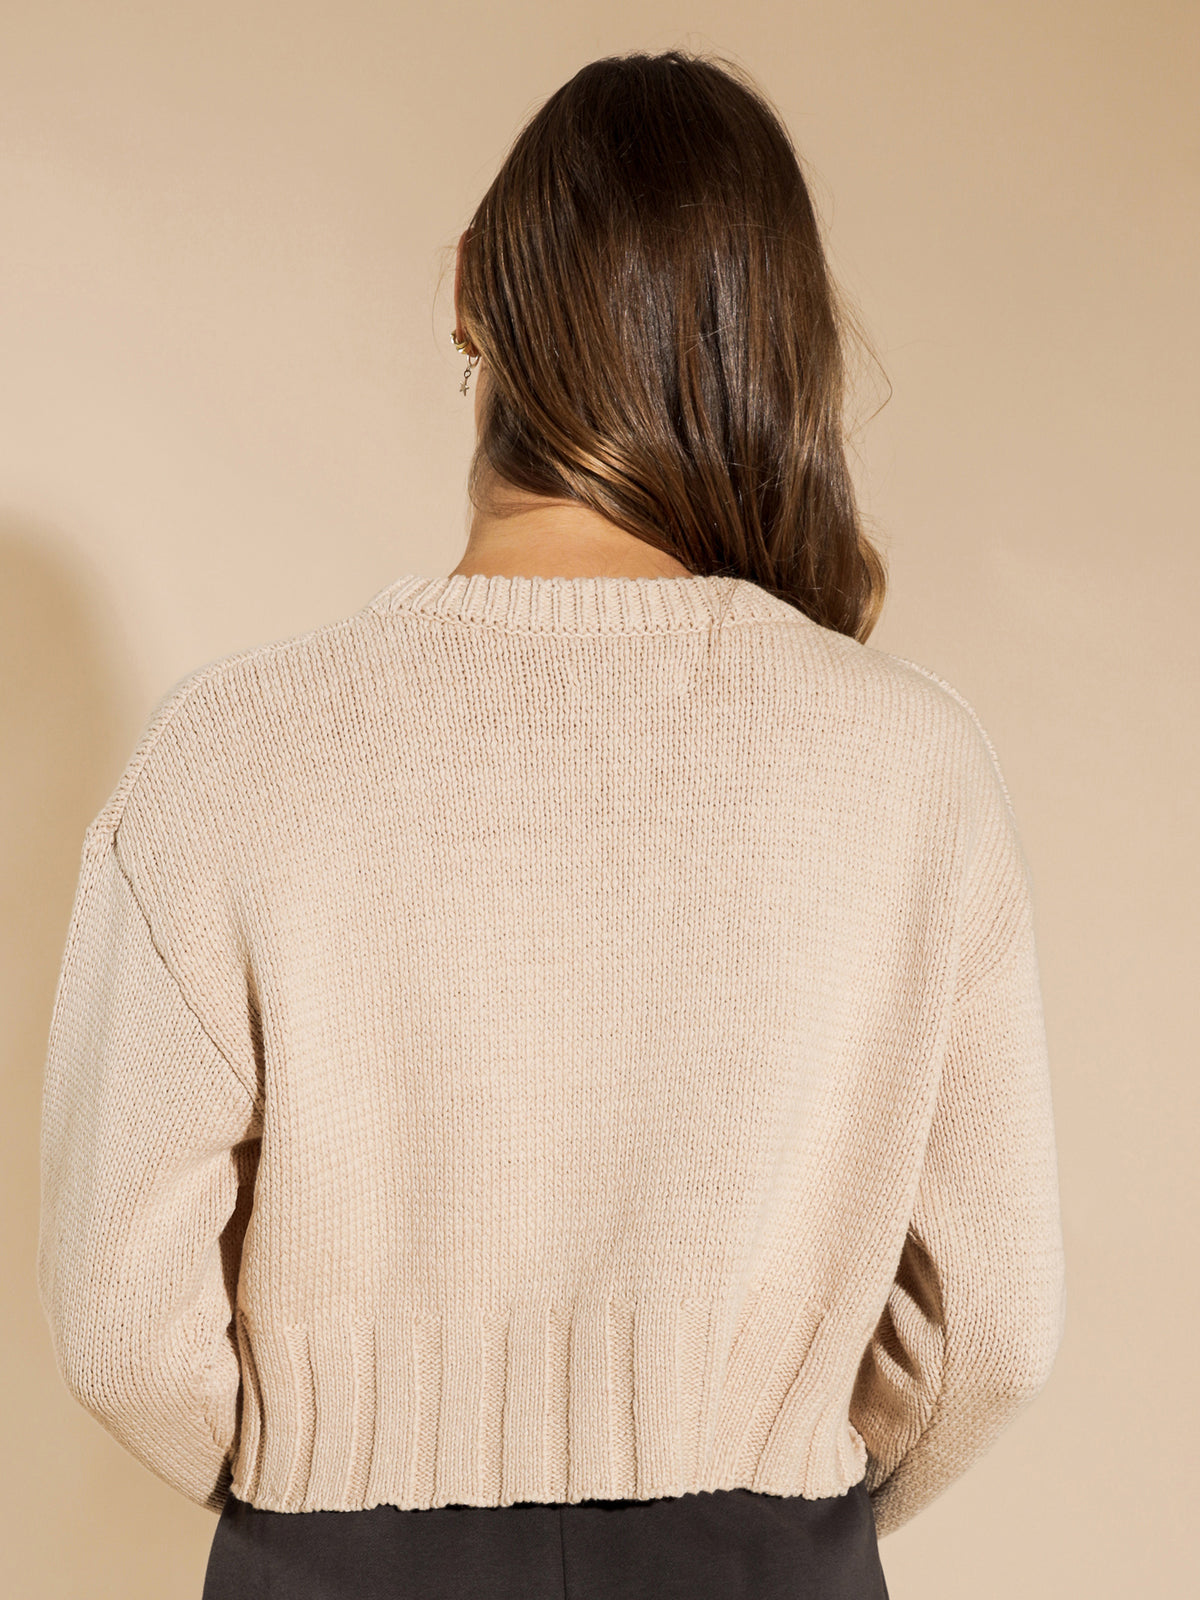 Rory Knit Jumper in Almond